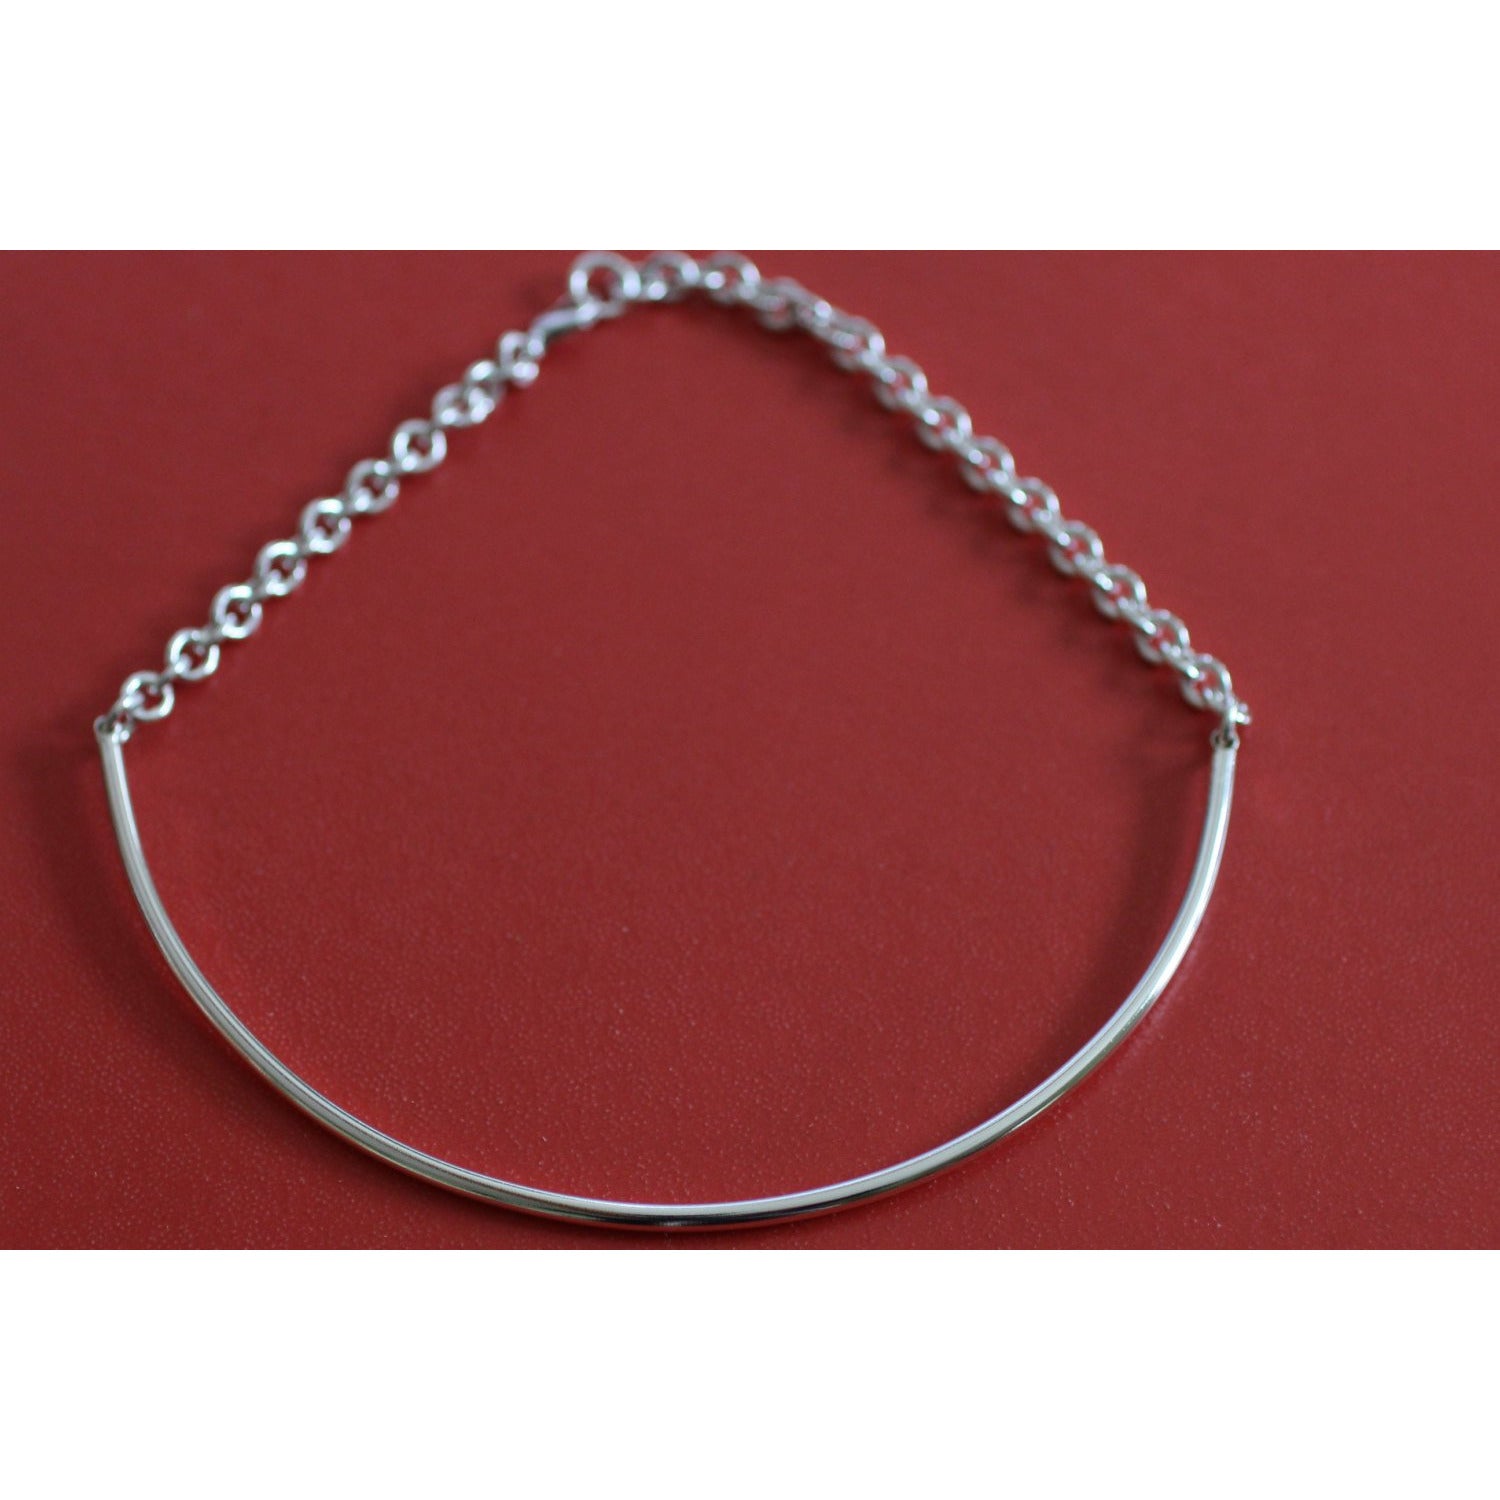 Discreet Day Collar, Removable Sterling O ring, 3mm Sterling Silver (8g), Chain Back Section, Handmade, BDSM Collar